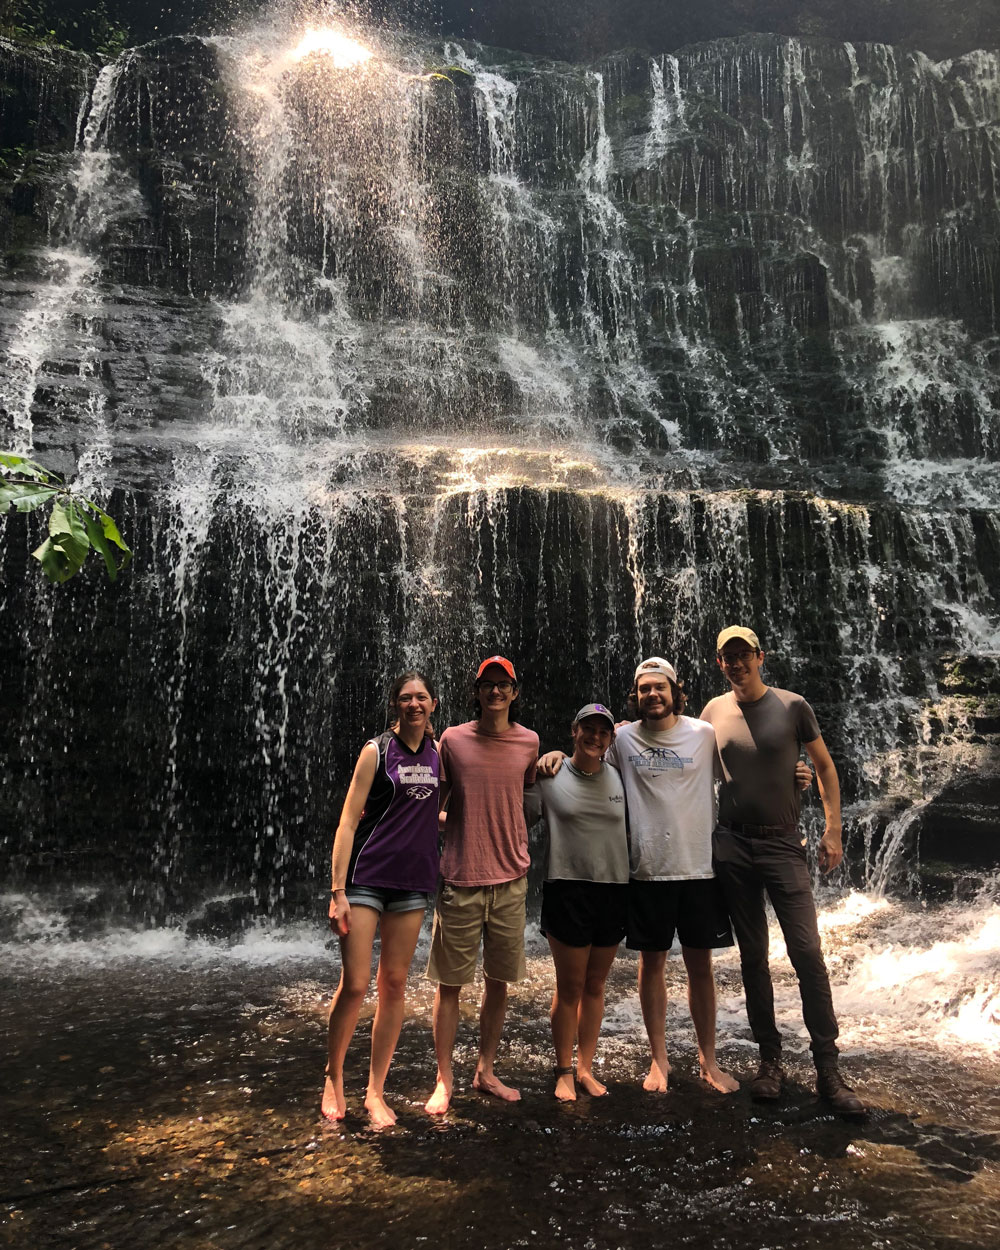 Summer research interns enjoying a day at the waterfall